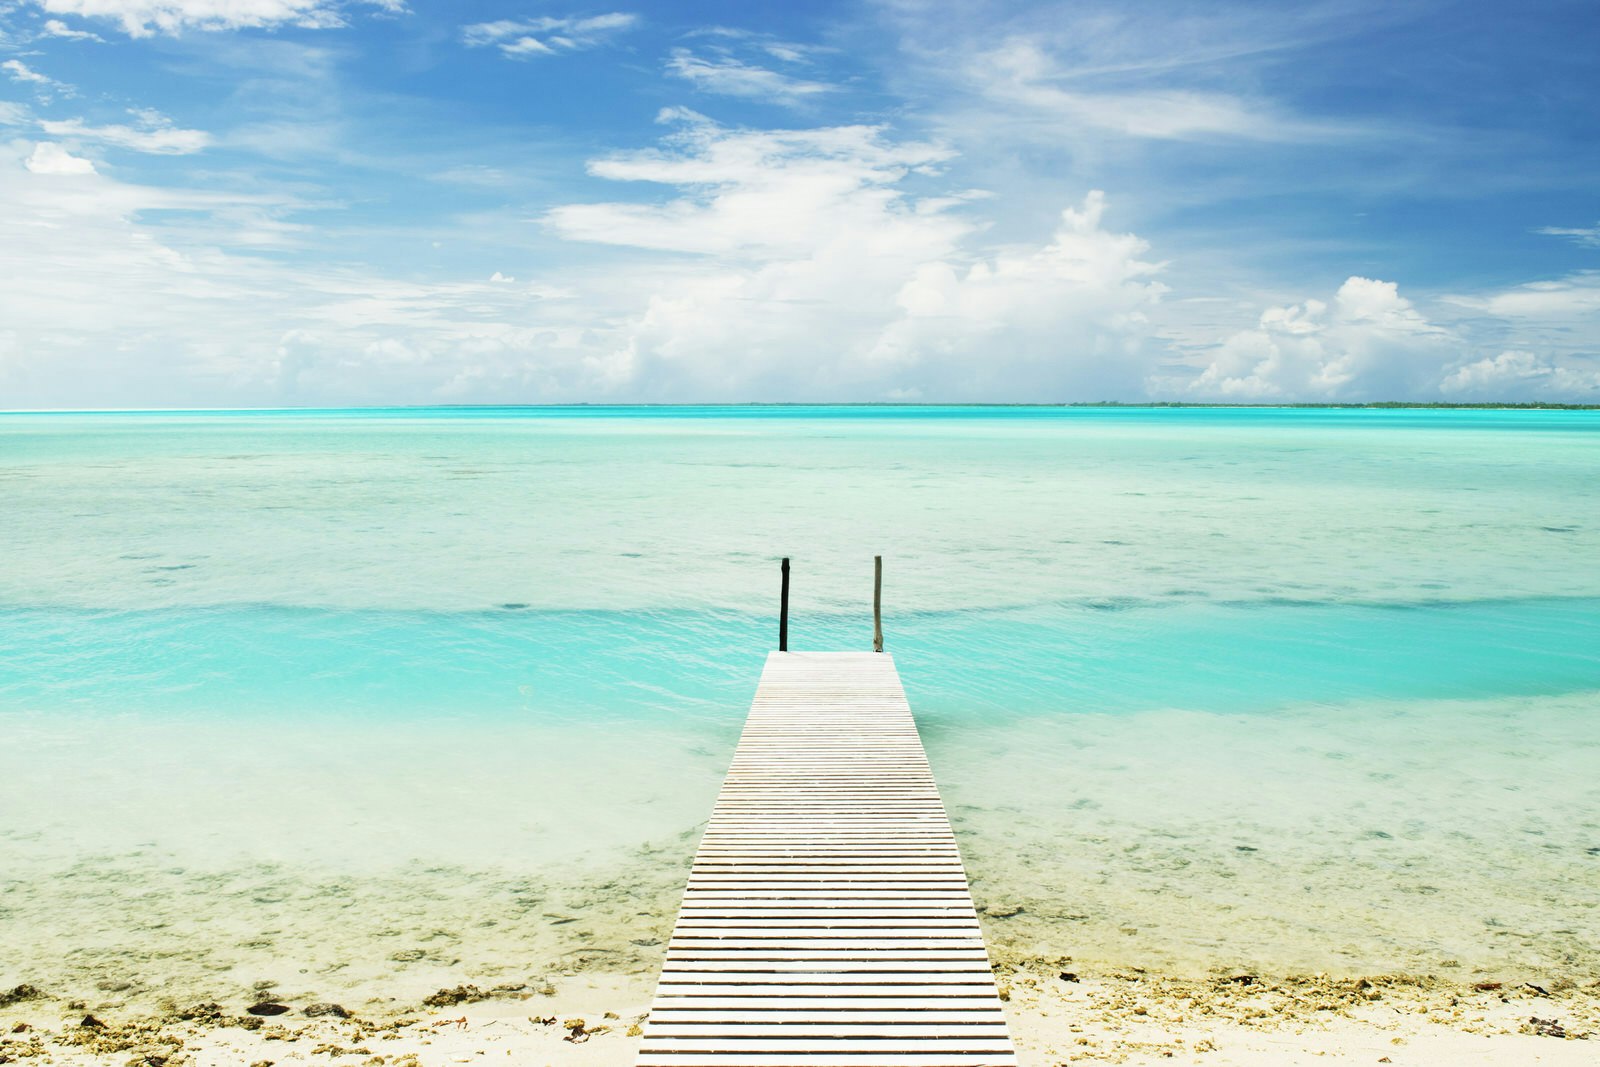 A small boardwalk jutting out over the lagoon in atoll Anaa, which is part of the Tuamotus in French Polynesia